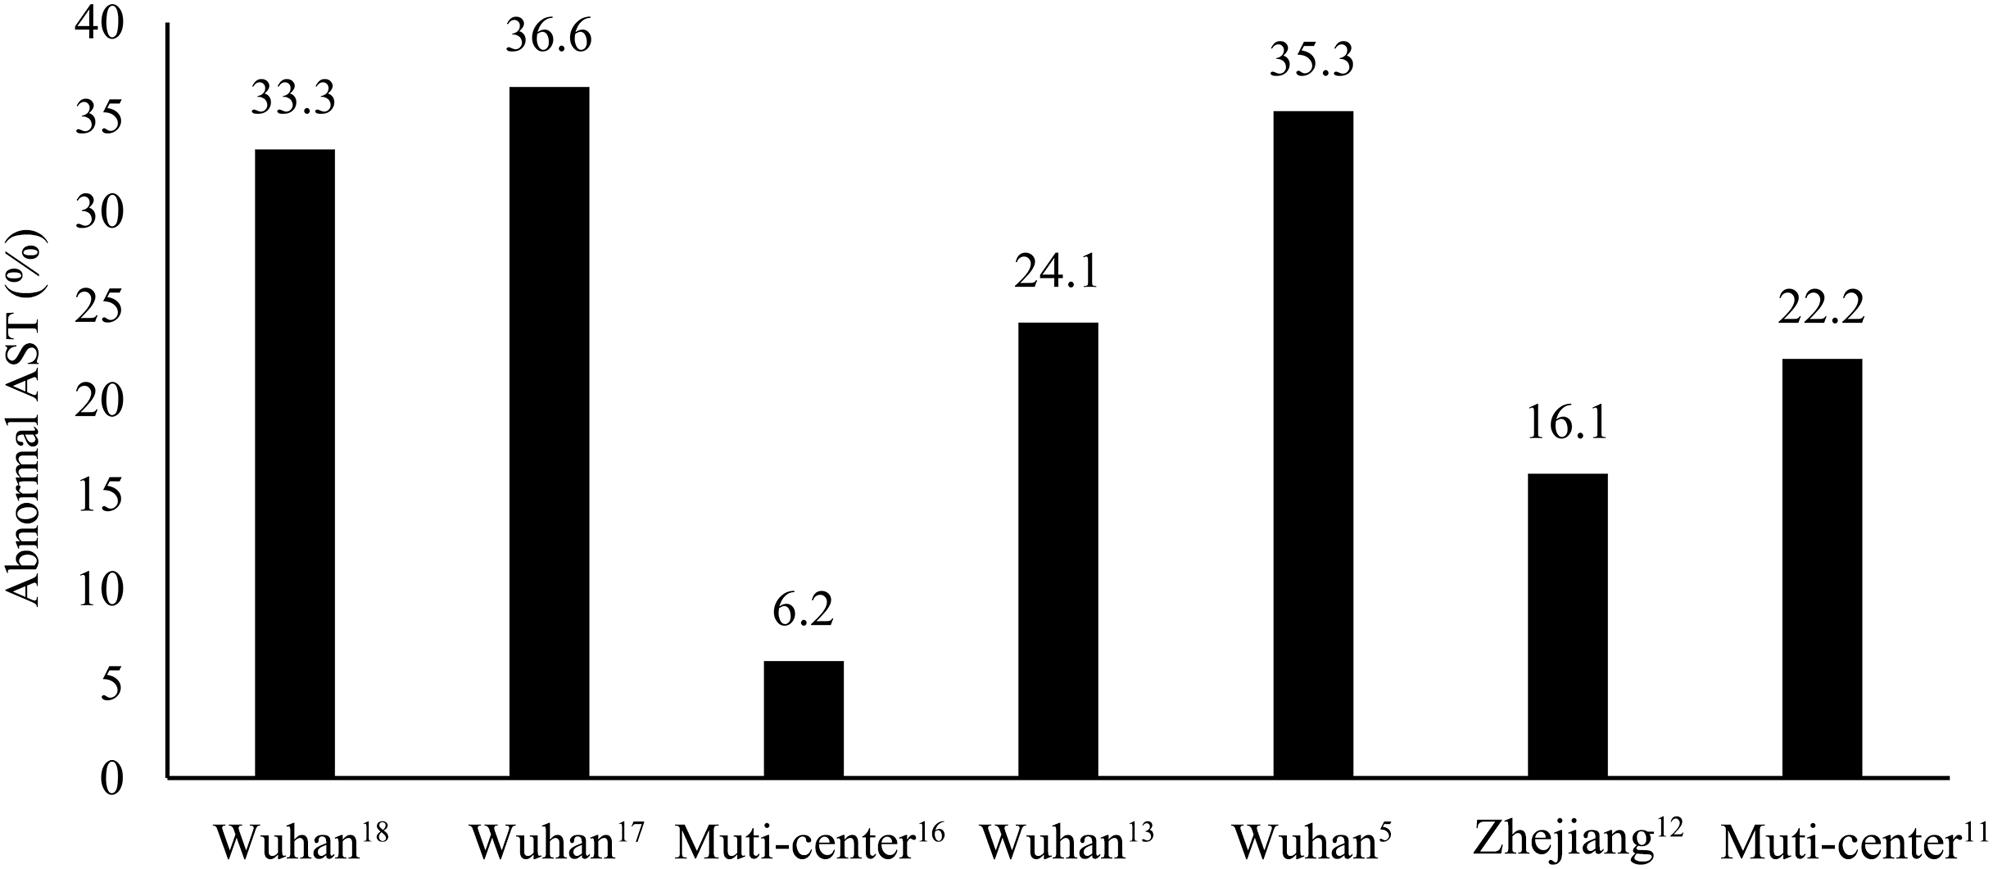 Proportion of patients with liver dysfunction in Chinese regions: Wuhan and outside Wuhan.